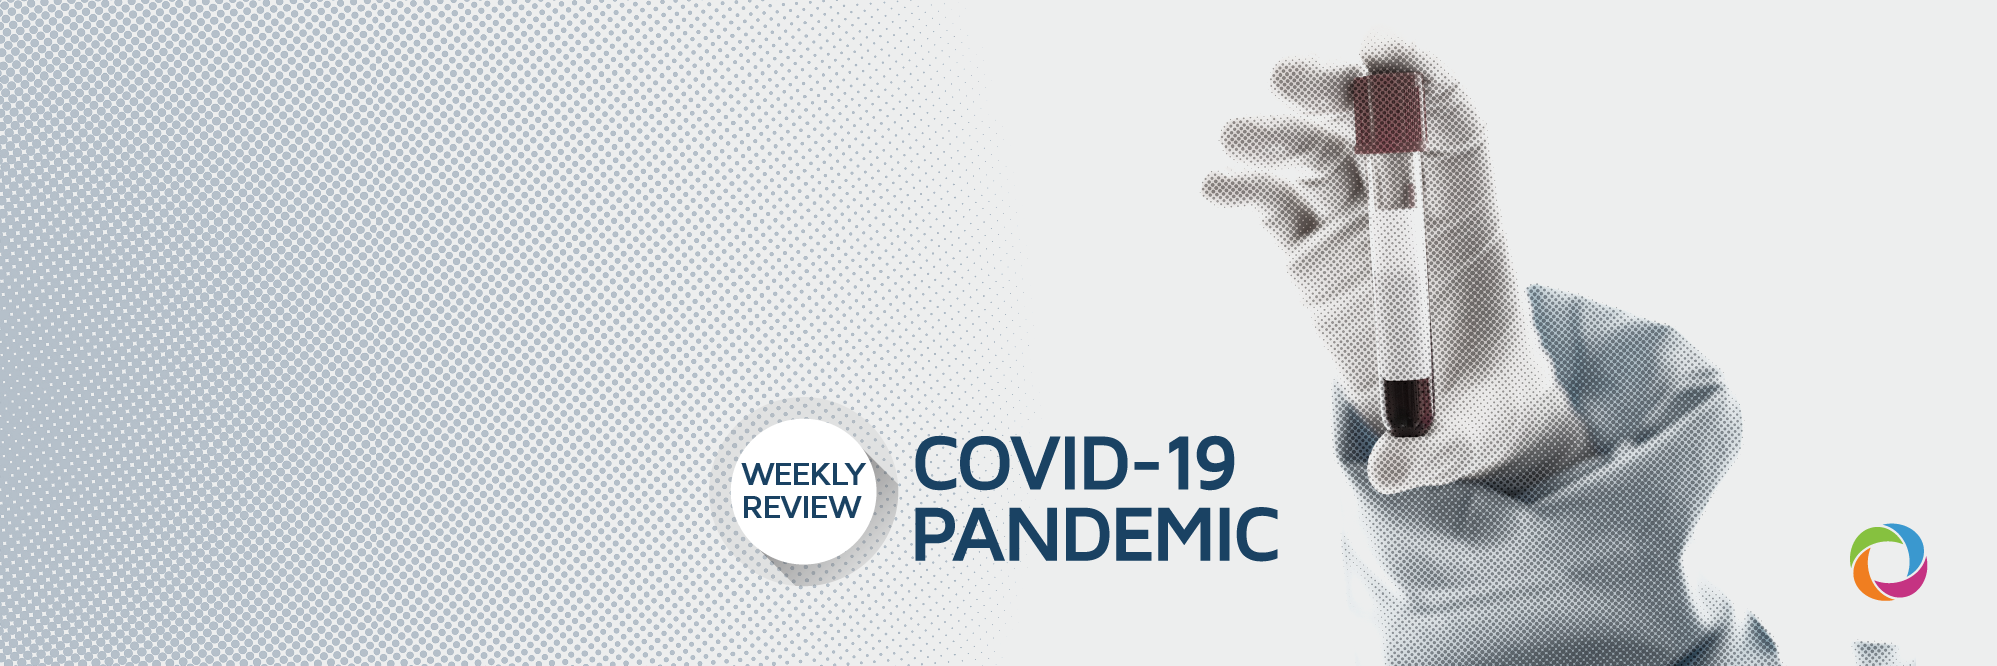 The “new normal”, the Great Depression and a global jobs crisis: DevelopmentAid’s bi-weekly review of the coronavirus situation across the world